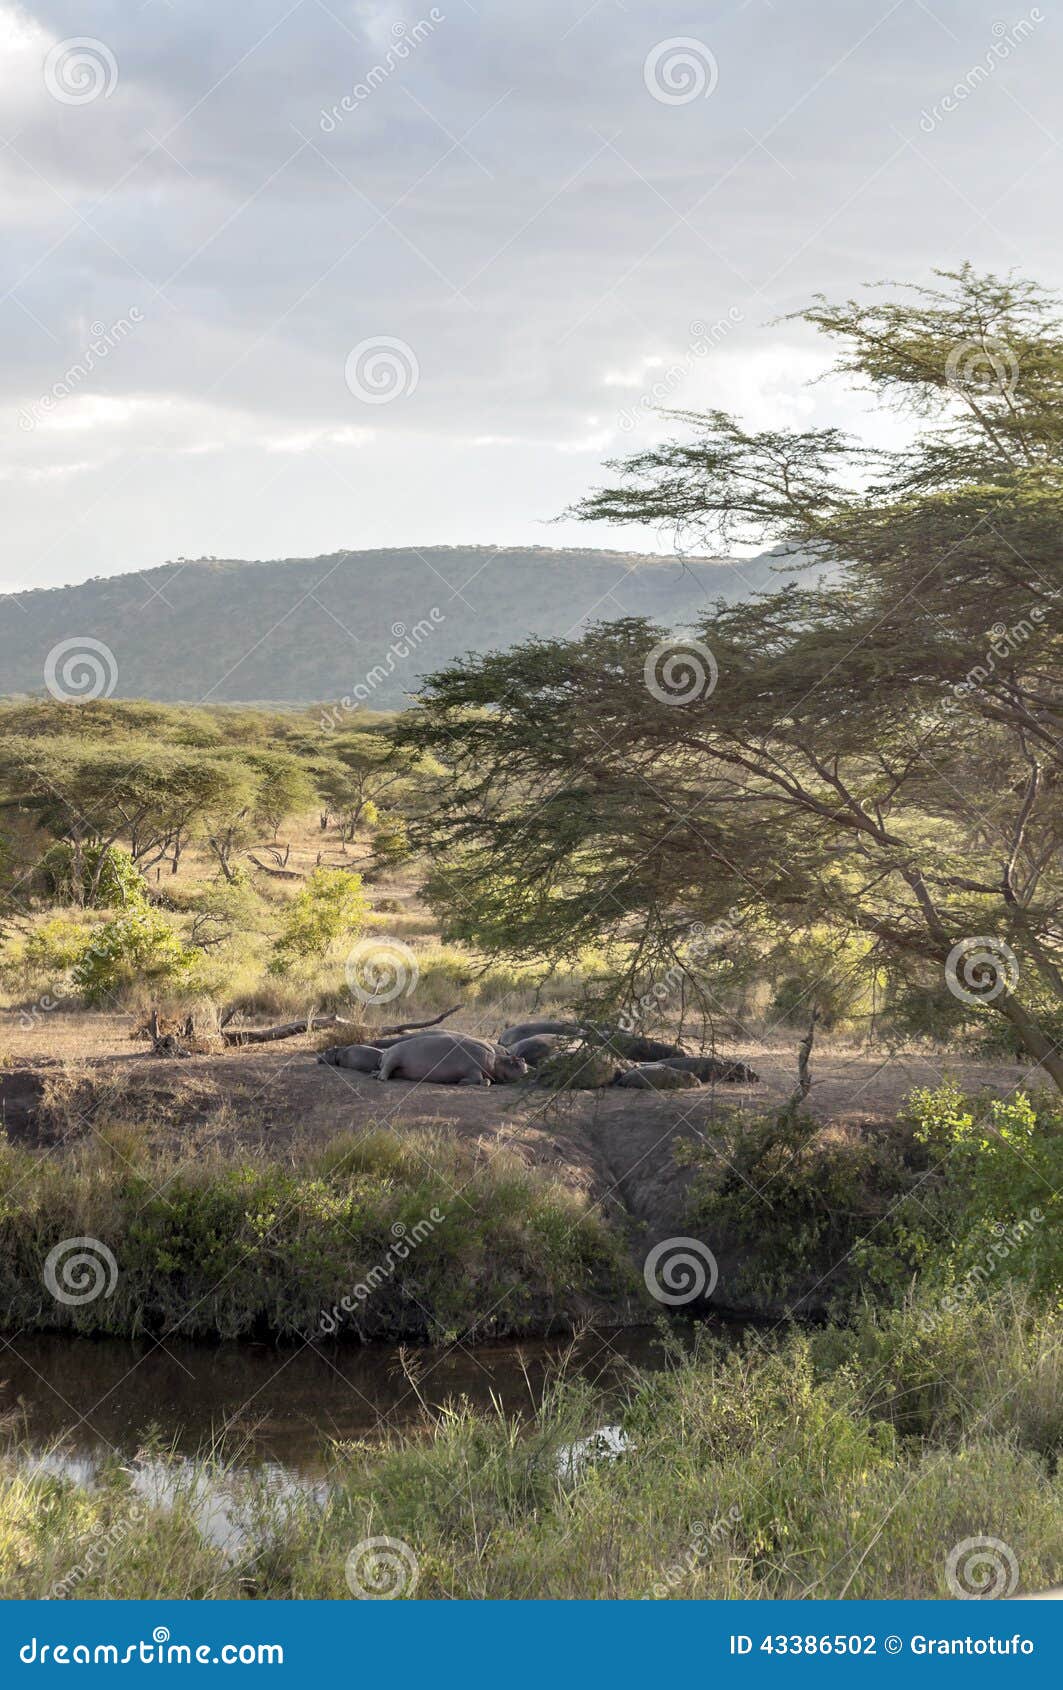 hippos surrounded by trees